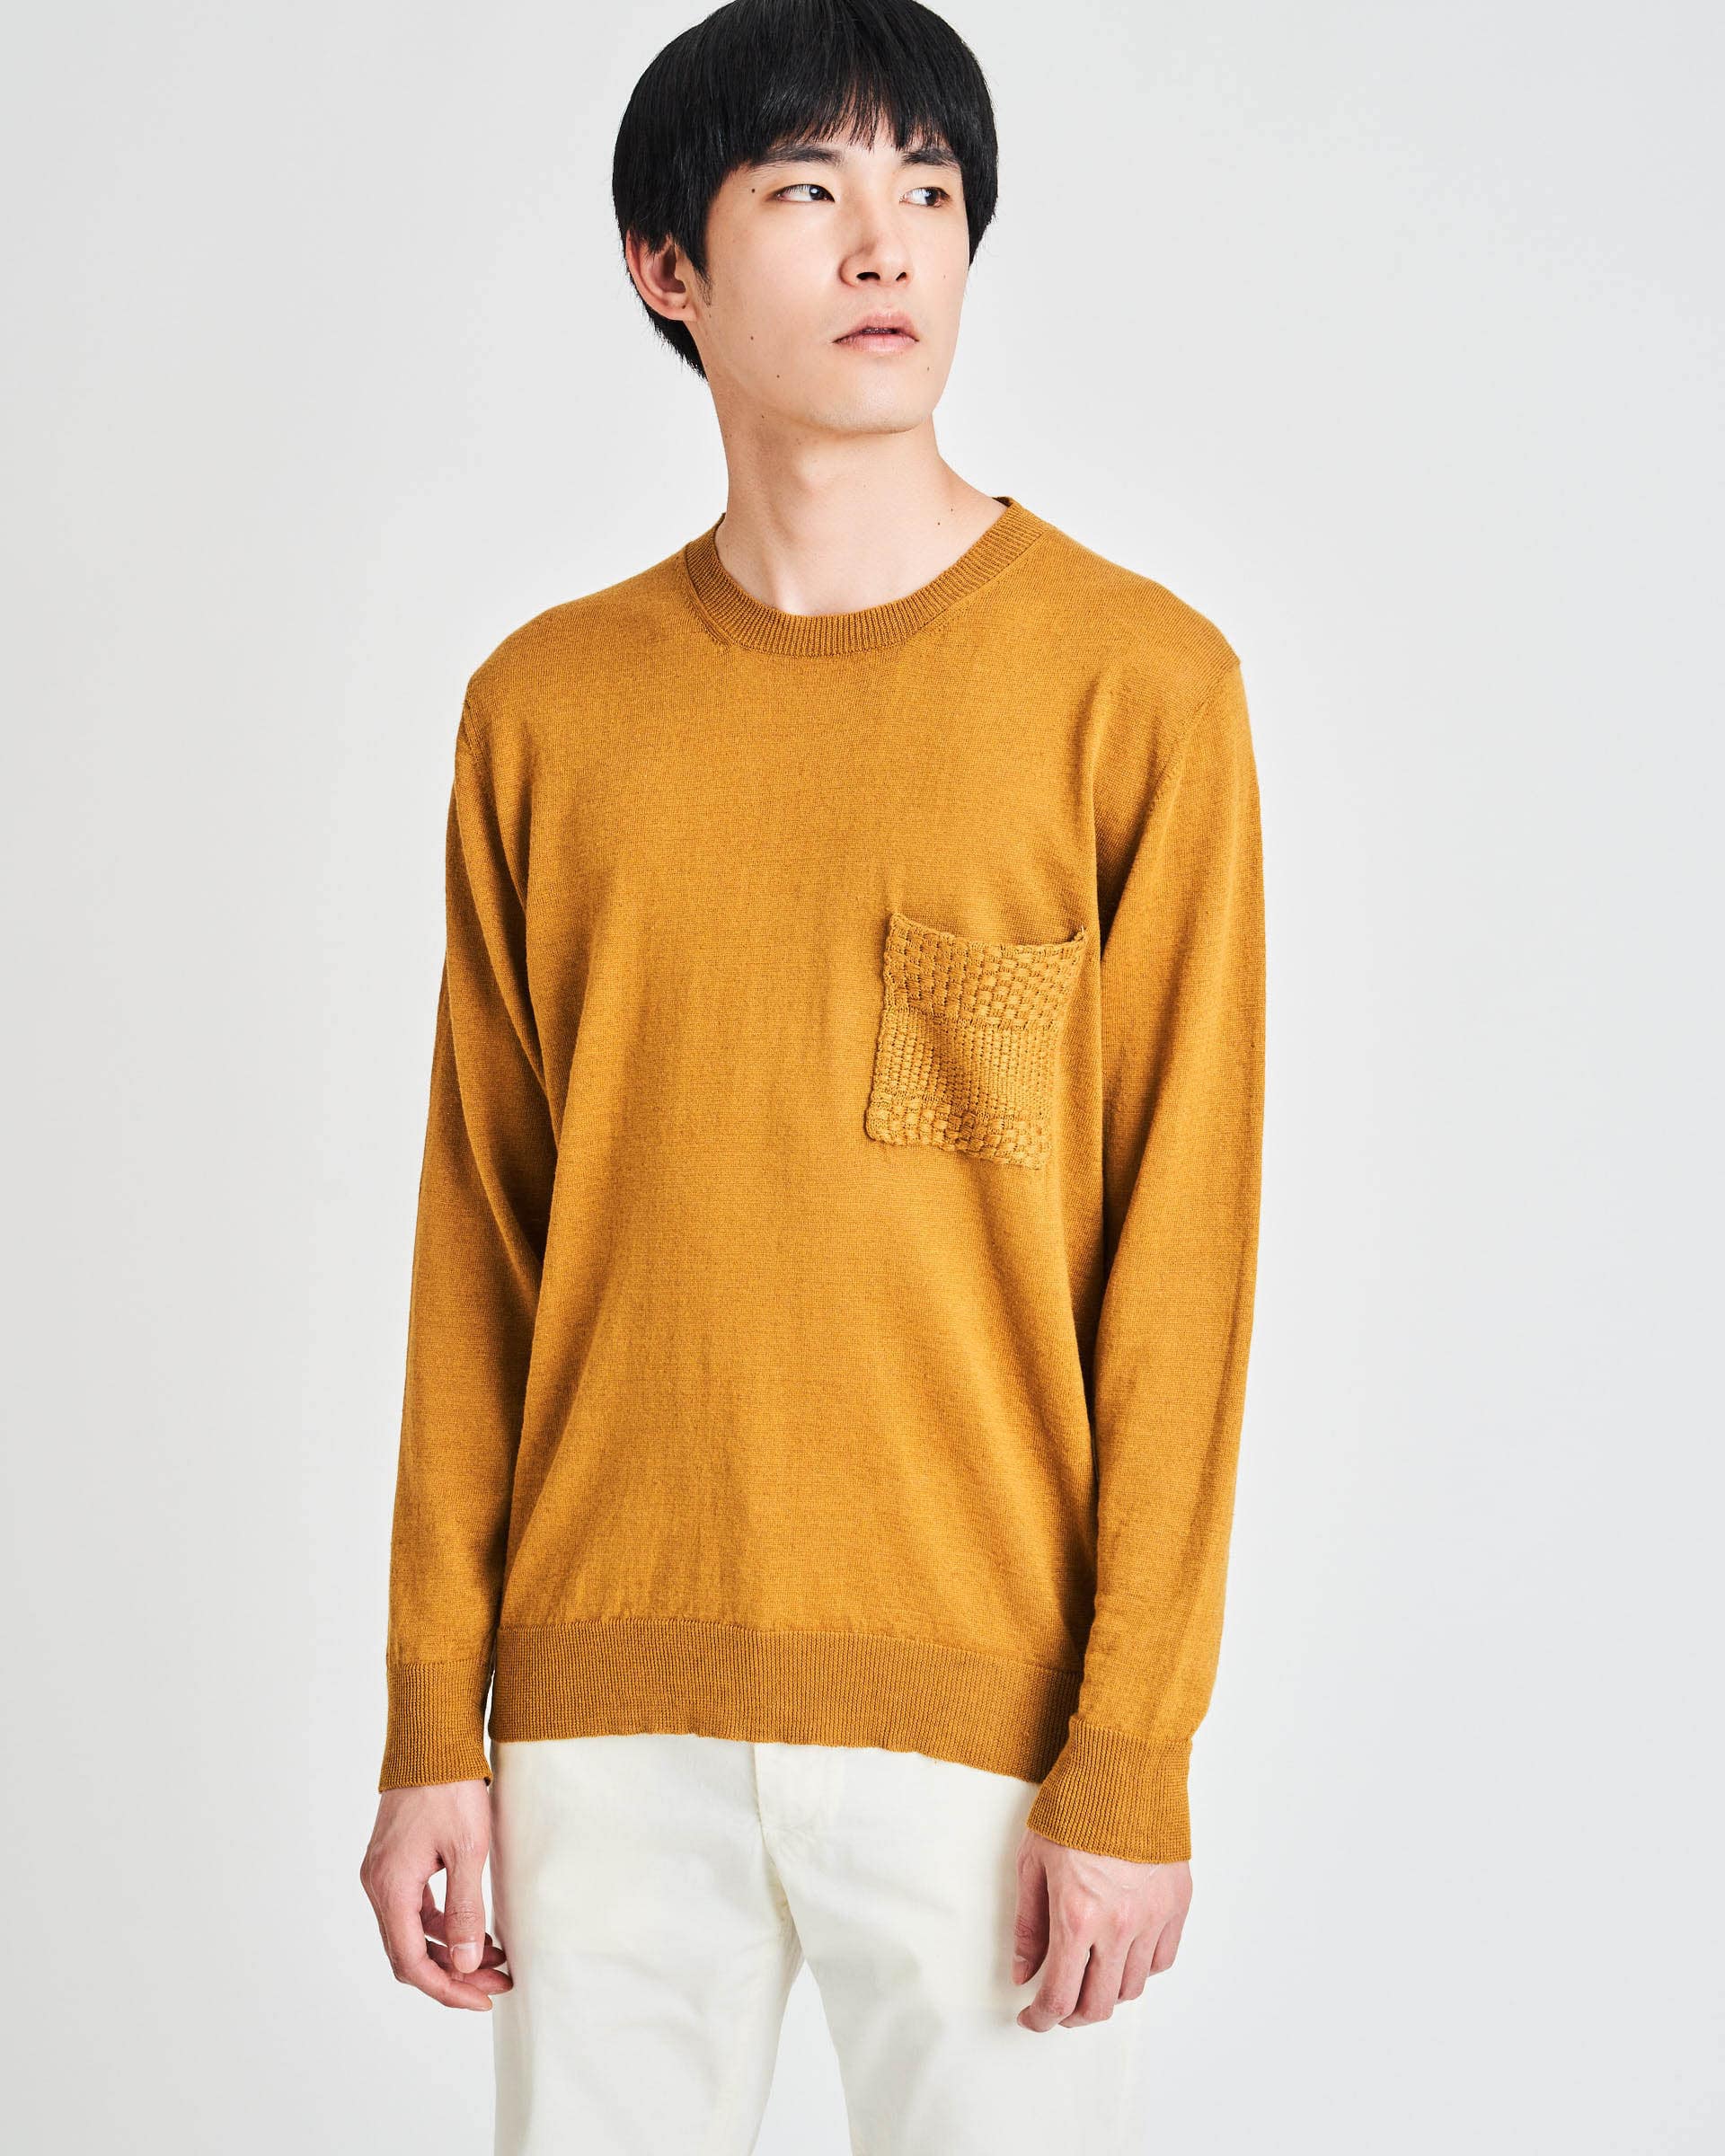 The Market Store | Crew Neck Sweater With Pocket